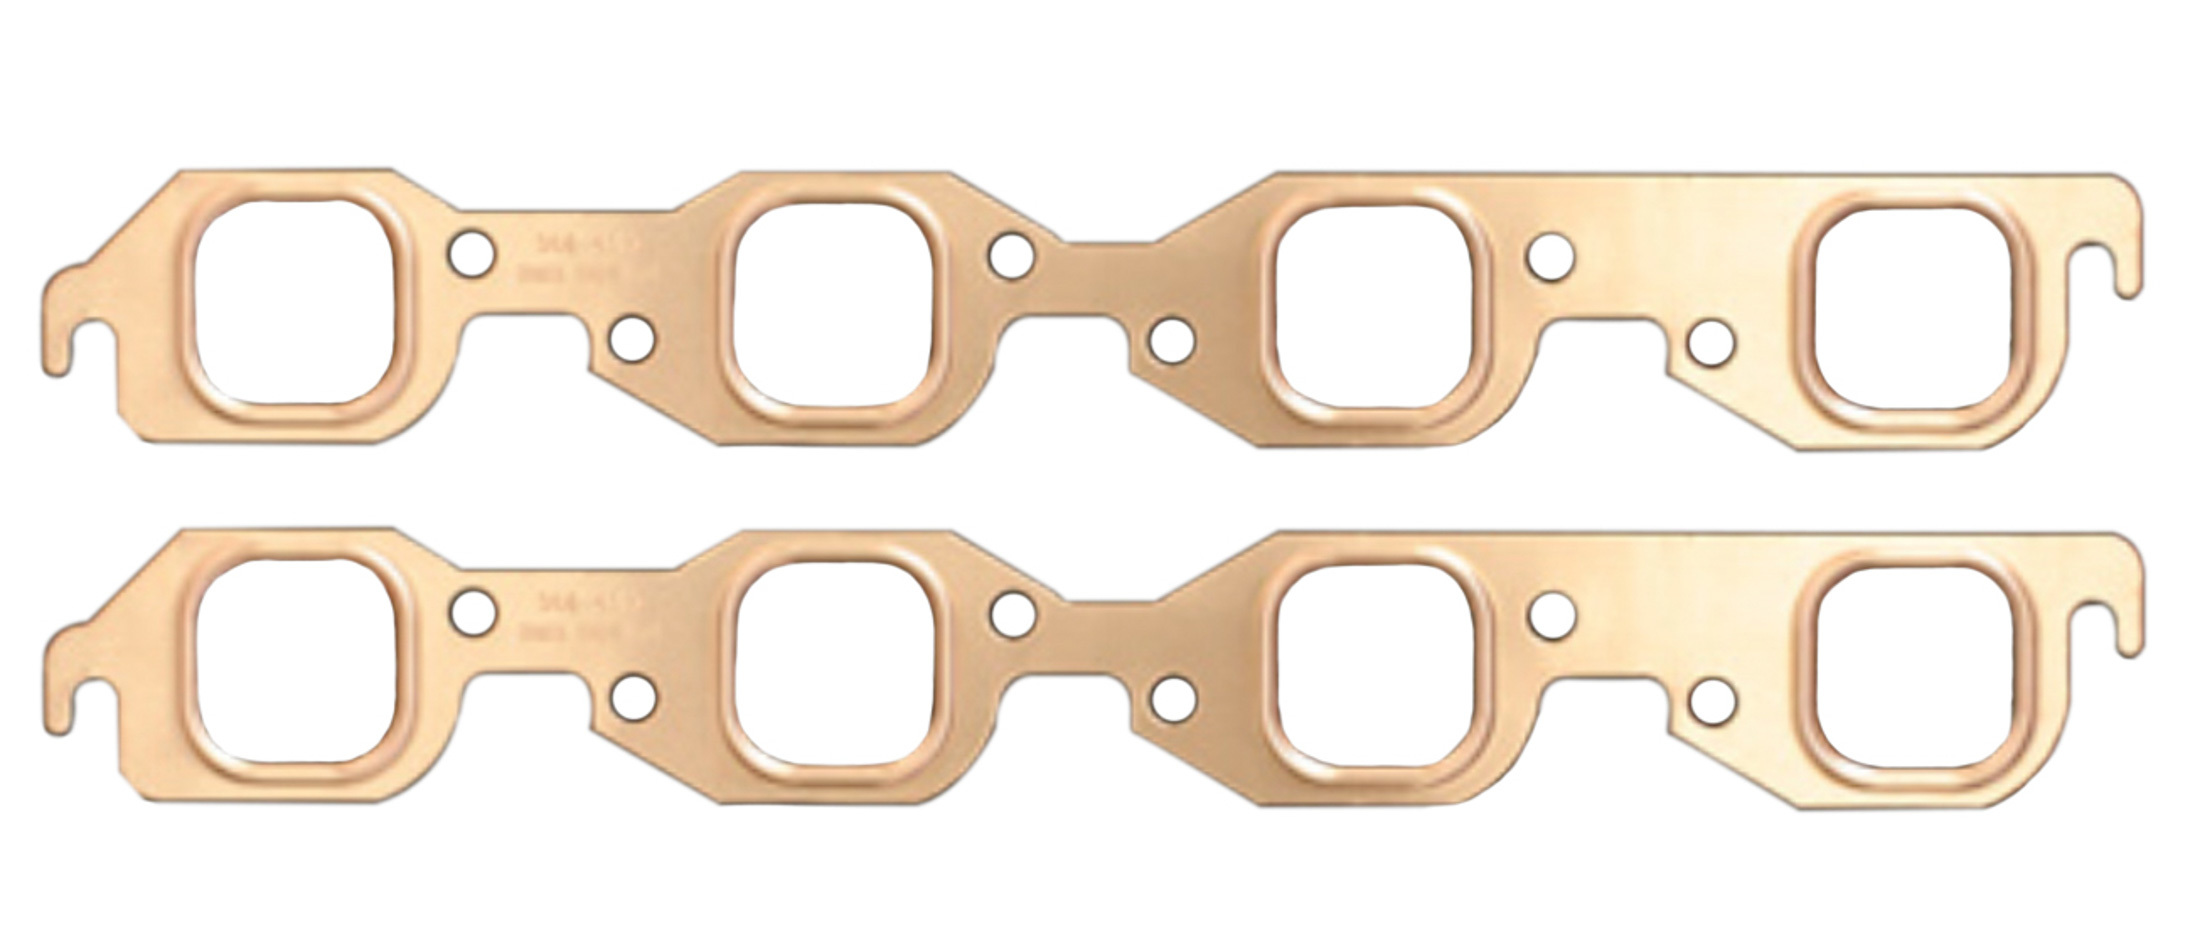 1.875 x 1.800 BBC Copper Embossed Exhaust Gasket